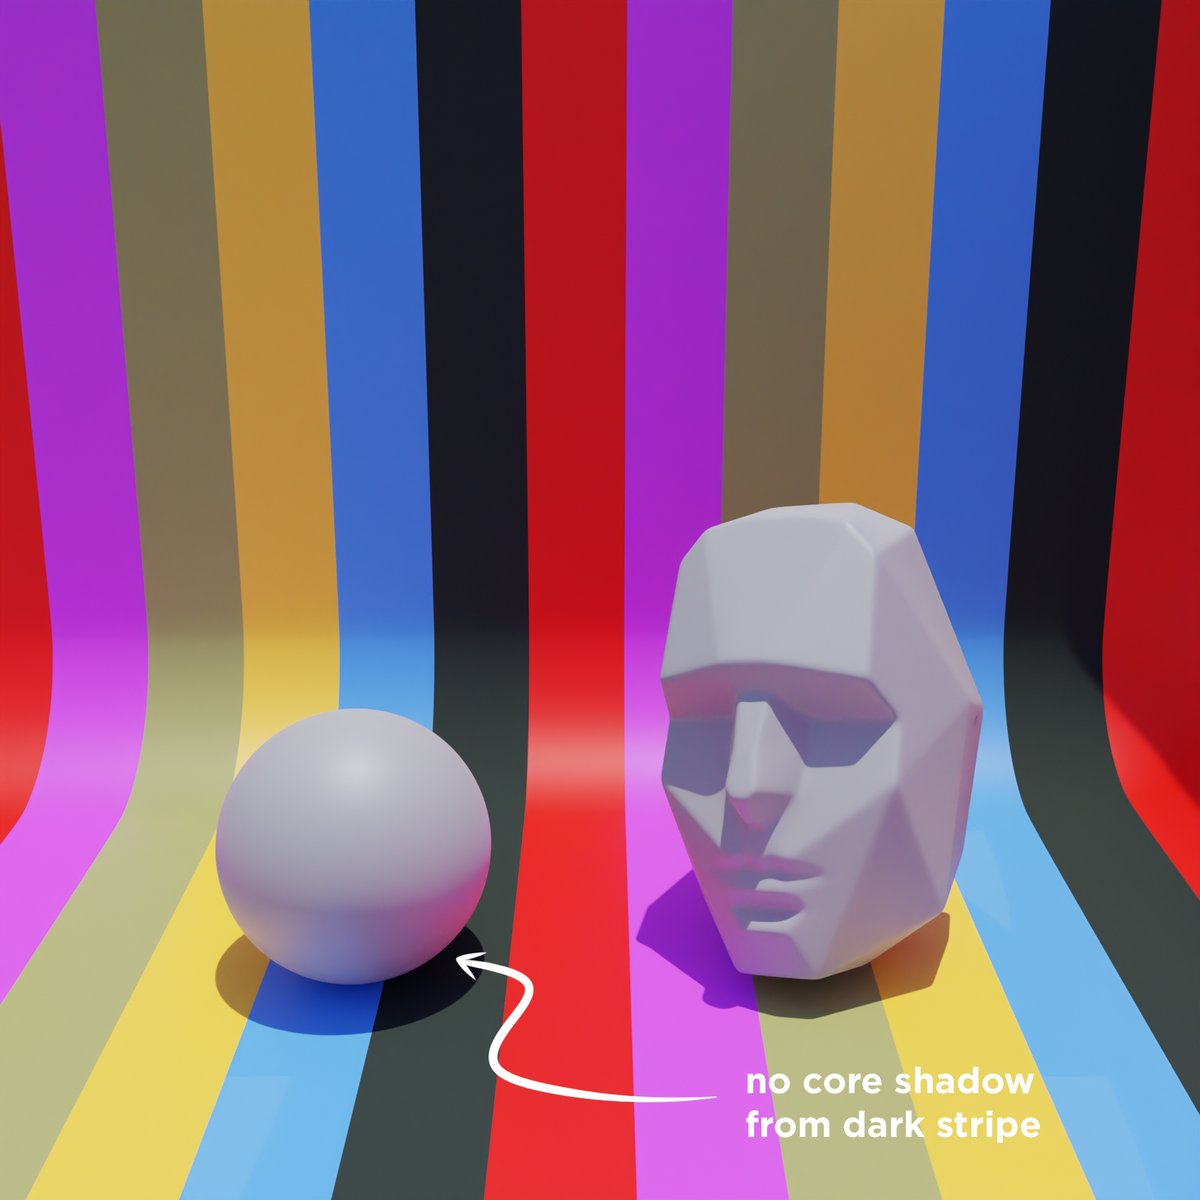 If there's no reflected light, there's no core shadow. Notice how the color and material of the ground affects the reflected light and thus the core shadow.